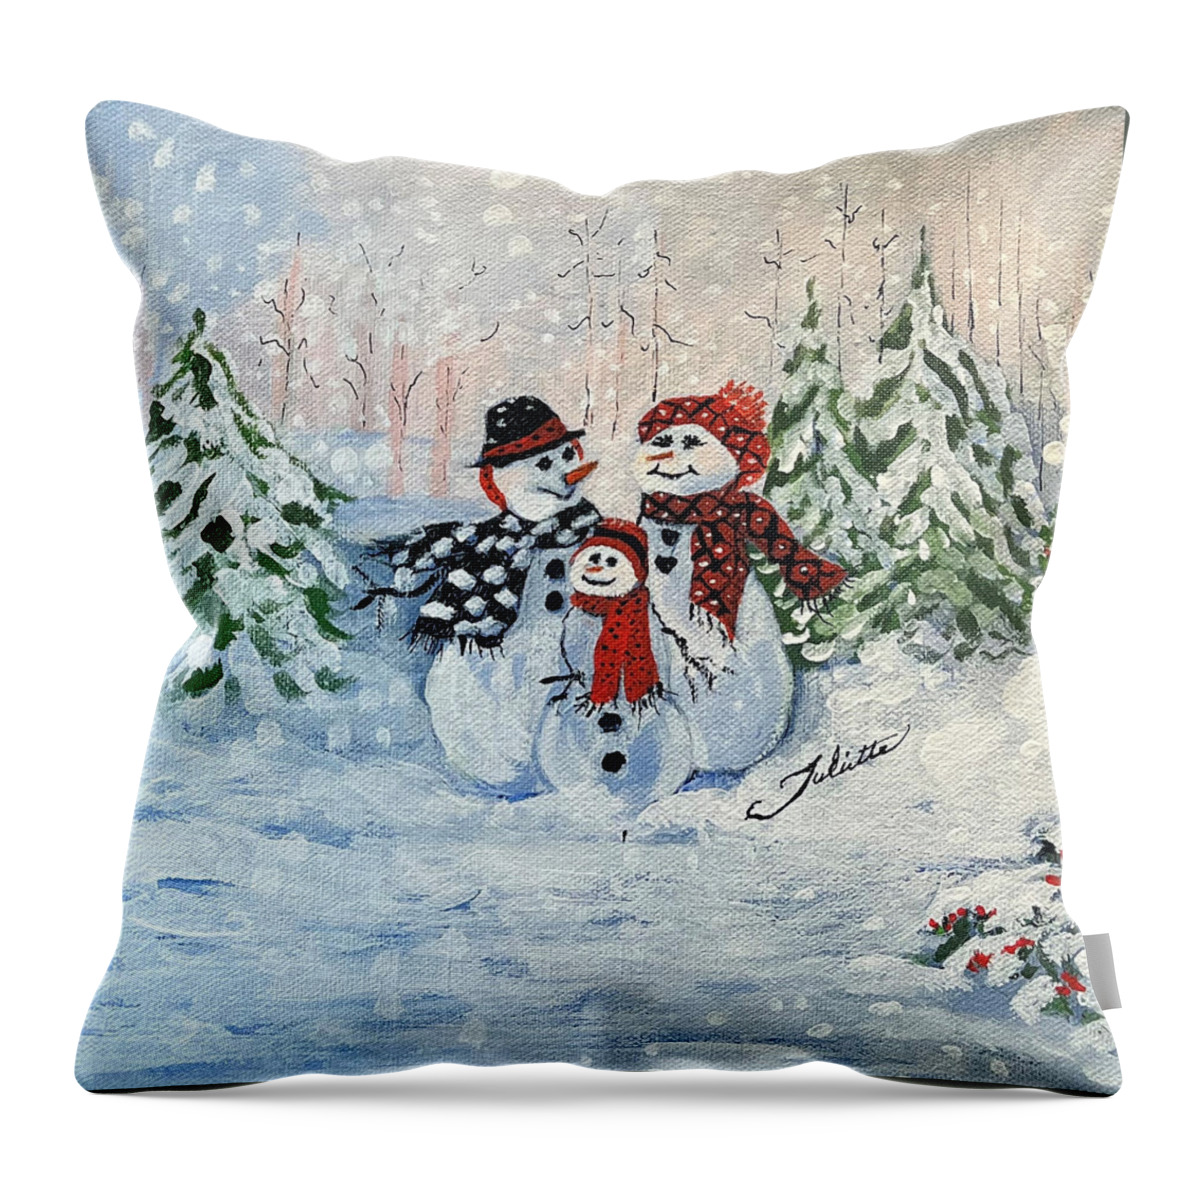 Snowman Throw Pillow featuring the painting There's Snow Place Like Home by Juliette Becker